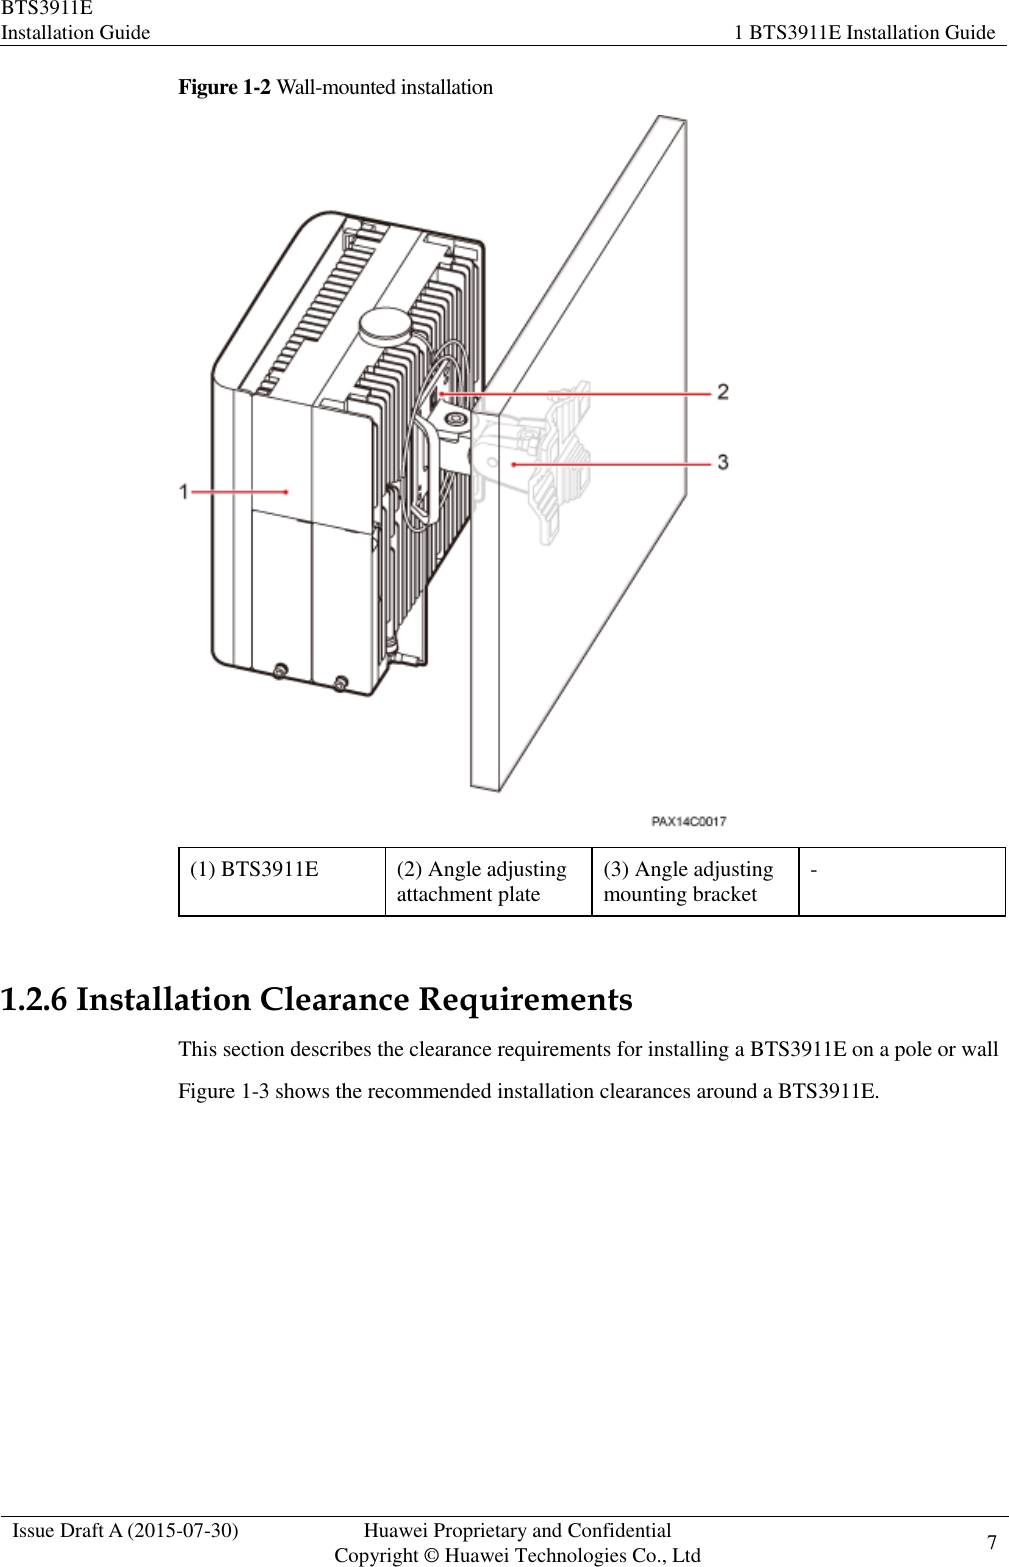 BTS3911E Installation Guide 1 BTS3911E Installation Guide  Issue Draft A (2015-07-30) Huawei Proprietary and Confidential           Copyright © Huawei Technologies Co., Ltd 7    Figure 1-2 Wall-mounted installation  (1) BTS3911E (2) Angle adjusting attachment plate (3) Angle adjusting mounting bracket -  1.2.6 Installation Clearance Requirements This section describes the clearance requirements for installing a BTS3911E on a pole or wall Figure 1-3 shows the recommended installation clearances around a BTS3911E. 